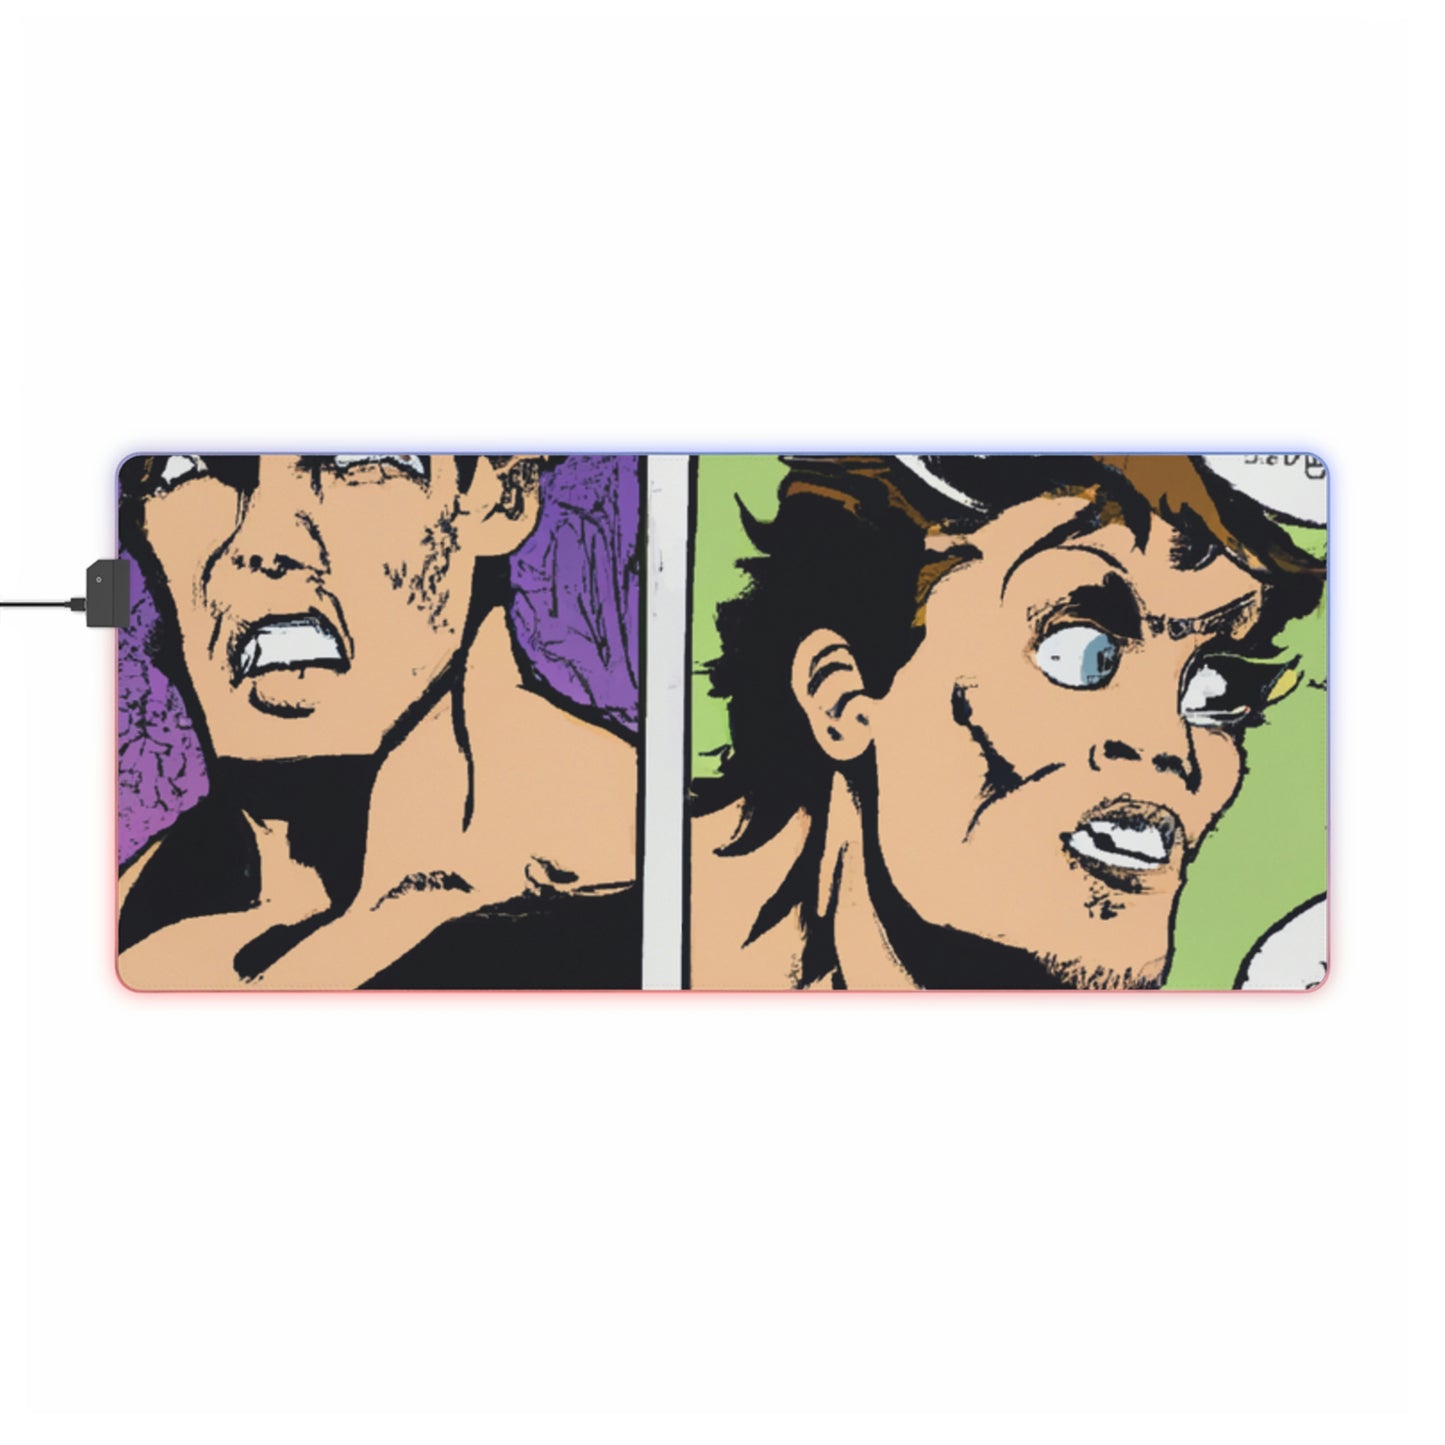 Gus Goodheart - Comic Book Collector LED Light Up Gaming Mouse Pad